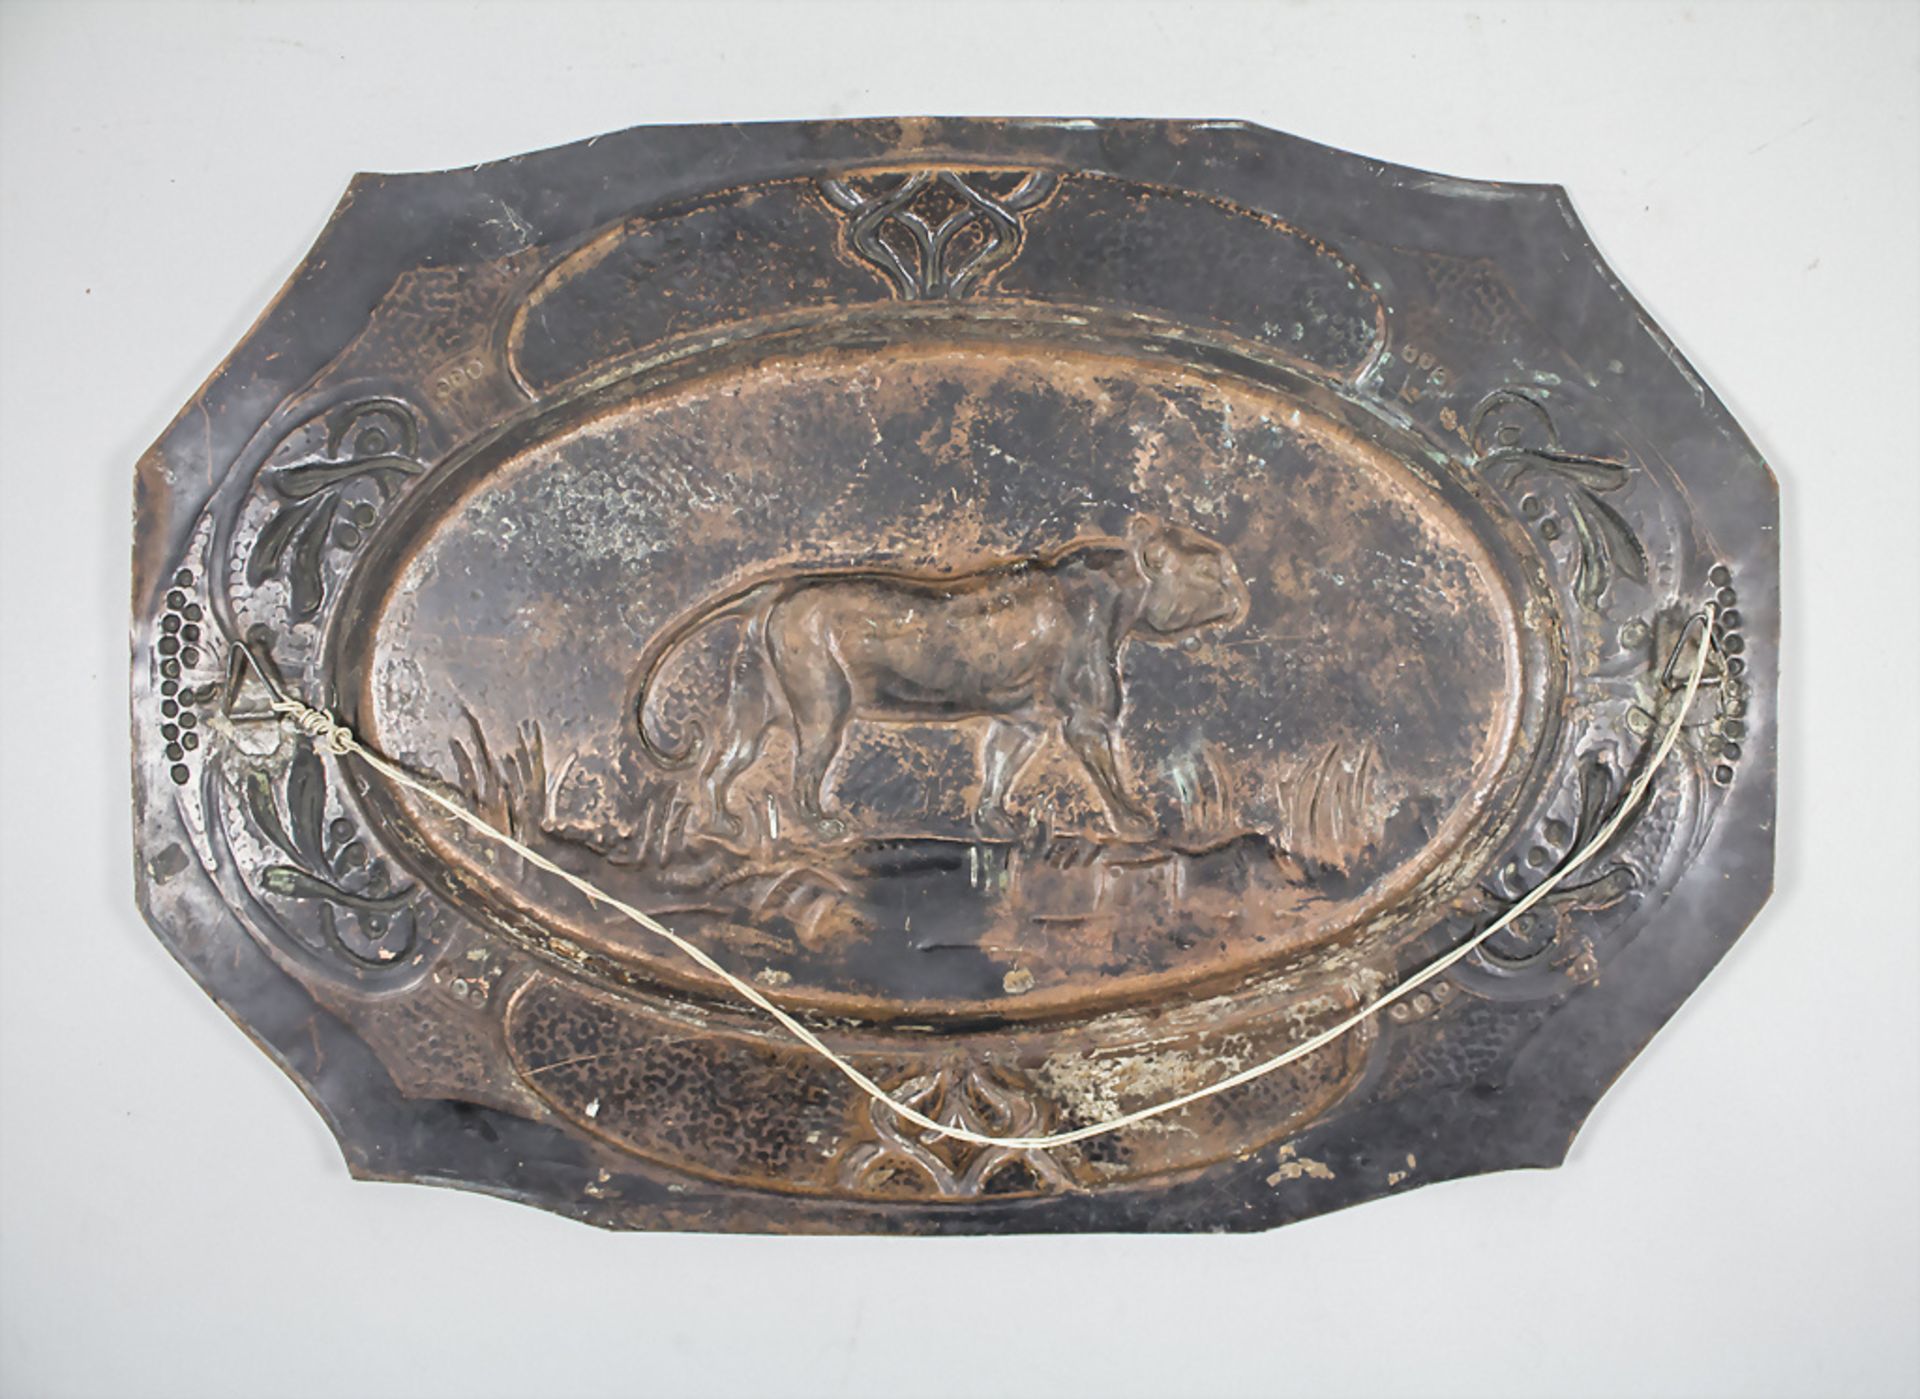 Kupfer-Wandplatte 'Panther' / A copper wall plate 'Panther' - Image 3 of 3